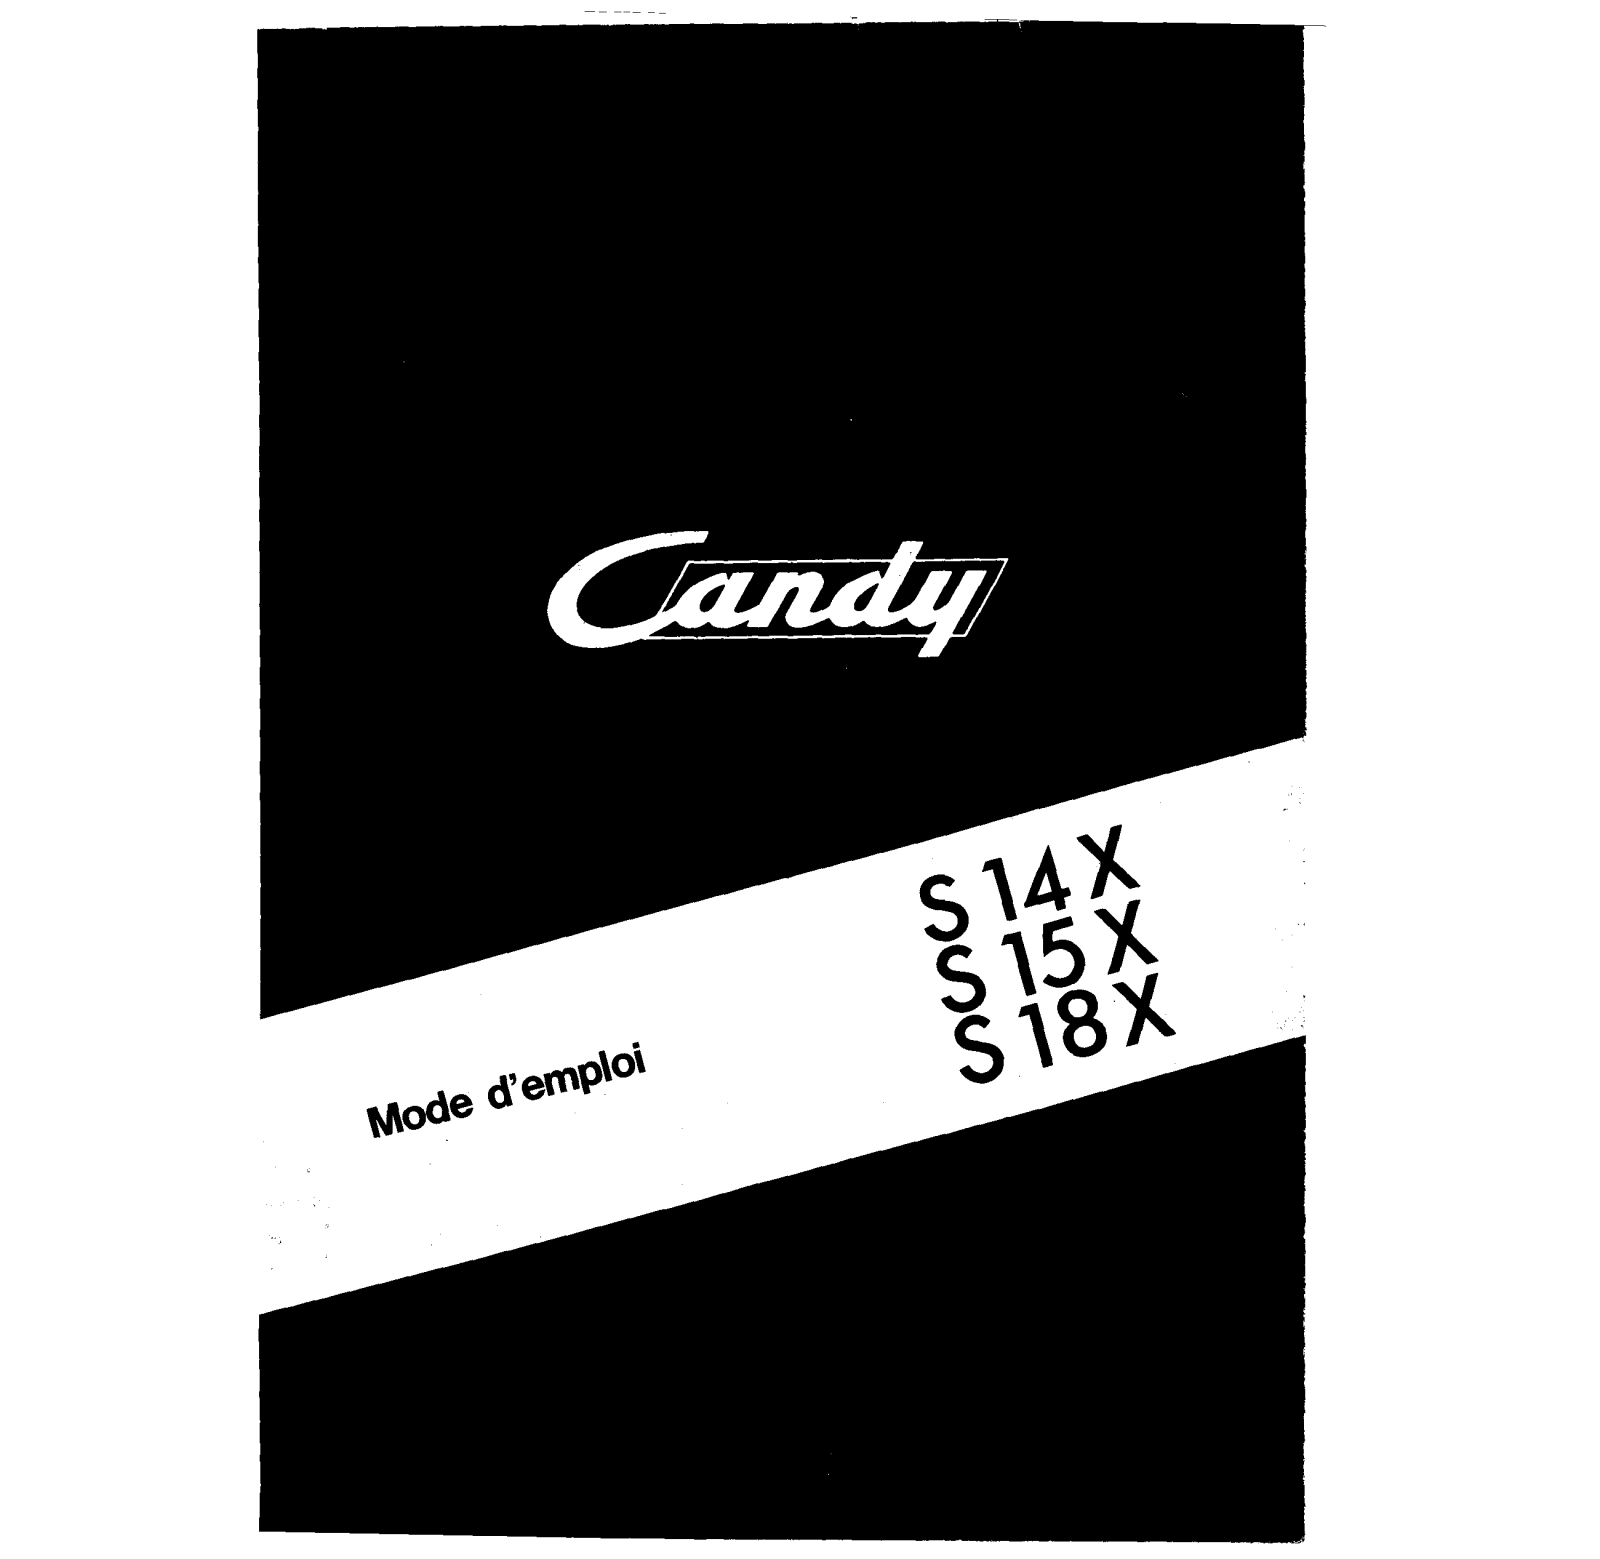 Candy S 14X, S 15X, S 18X User Manual